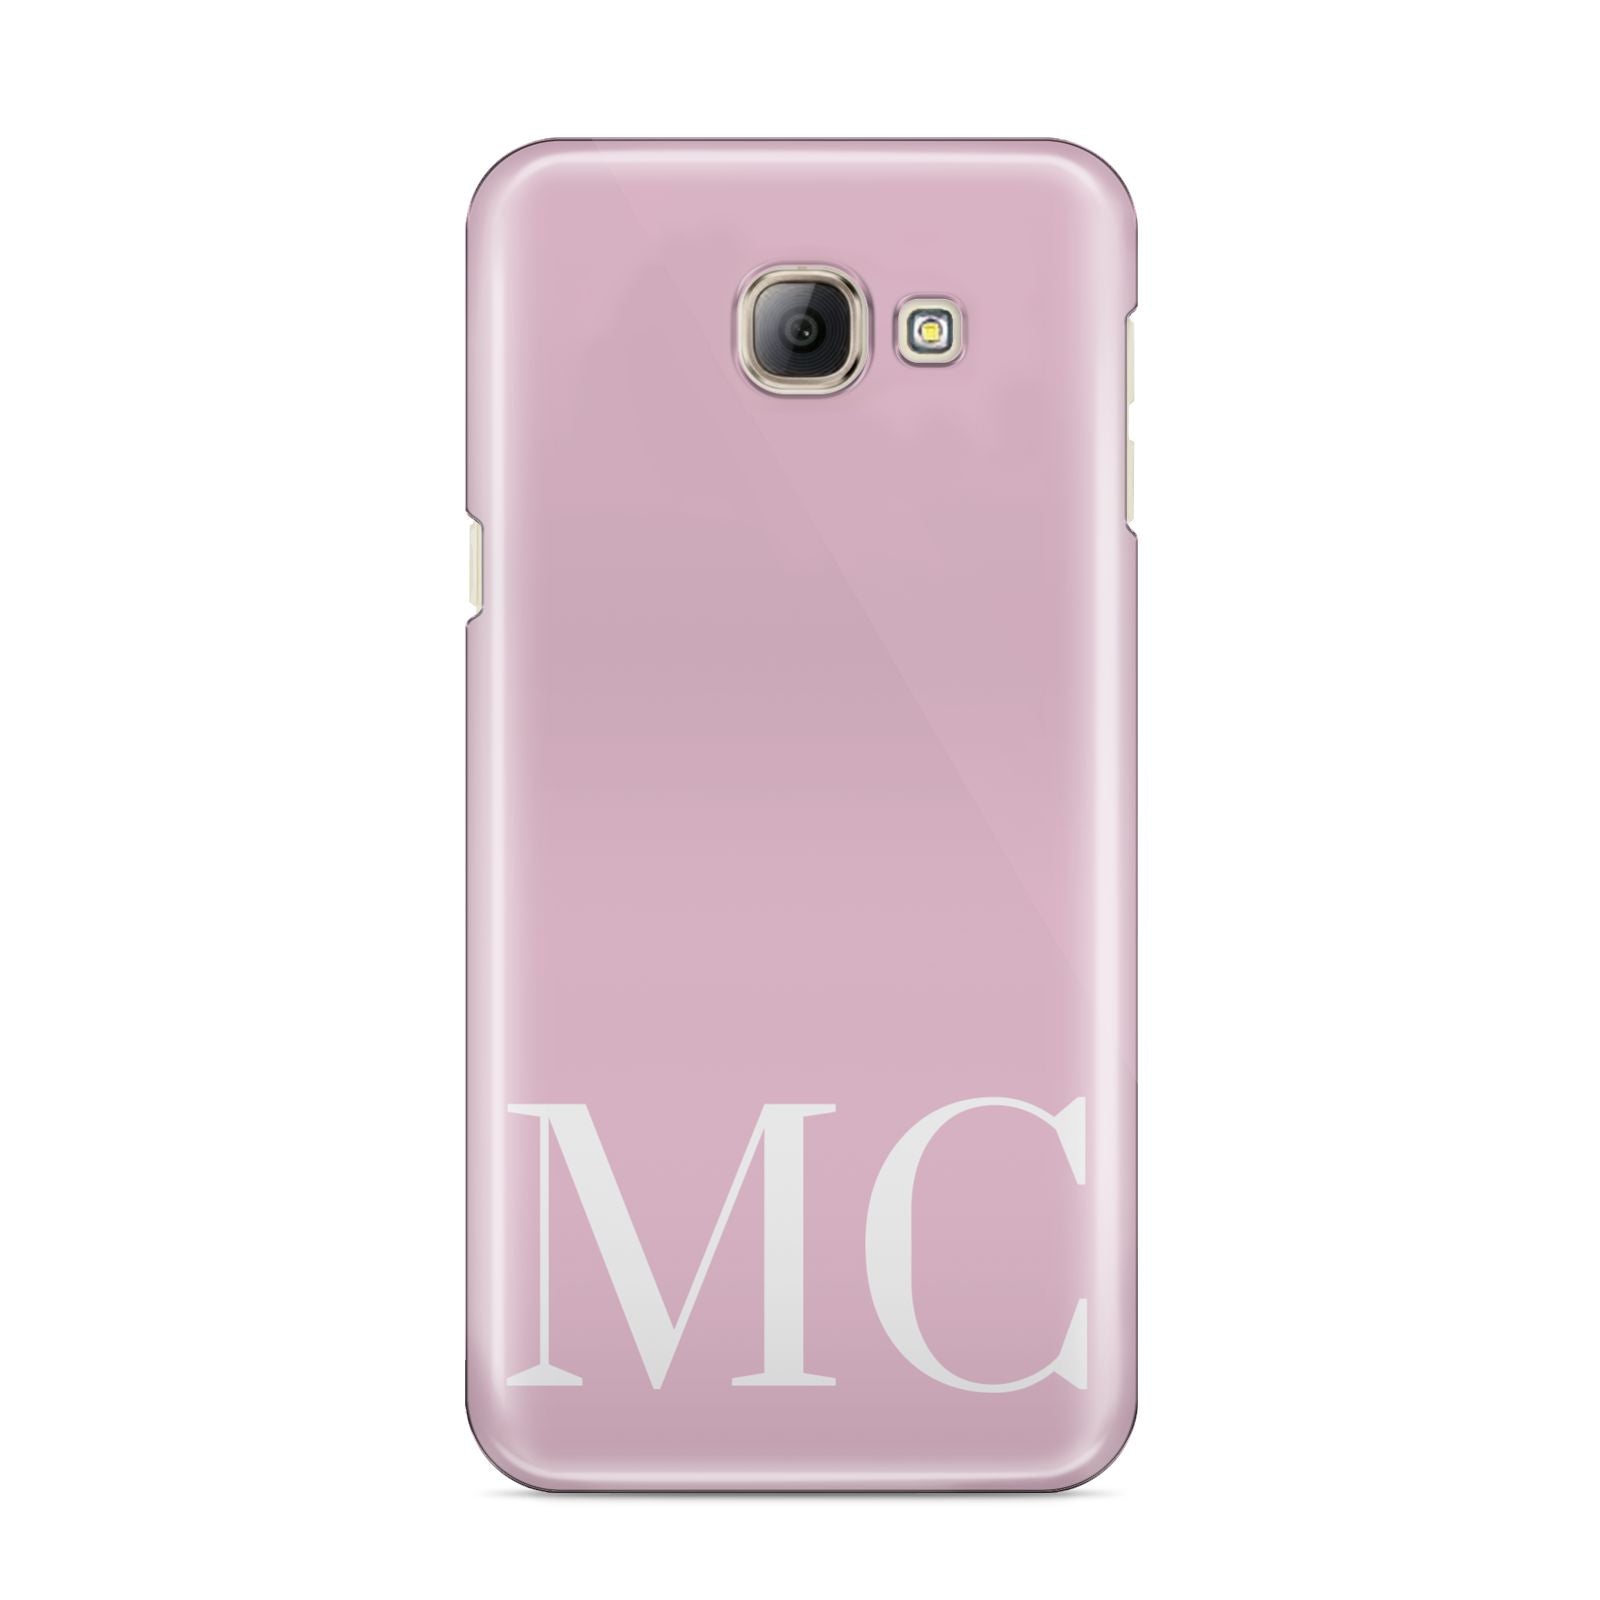 Initials Personalised 2 Samsung Galaxy A8 2016 Case